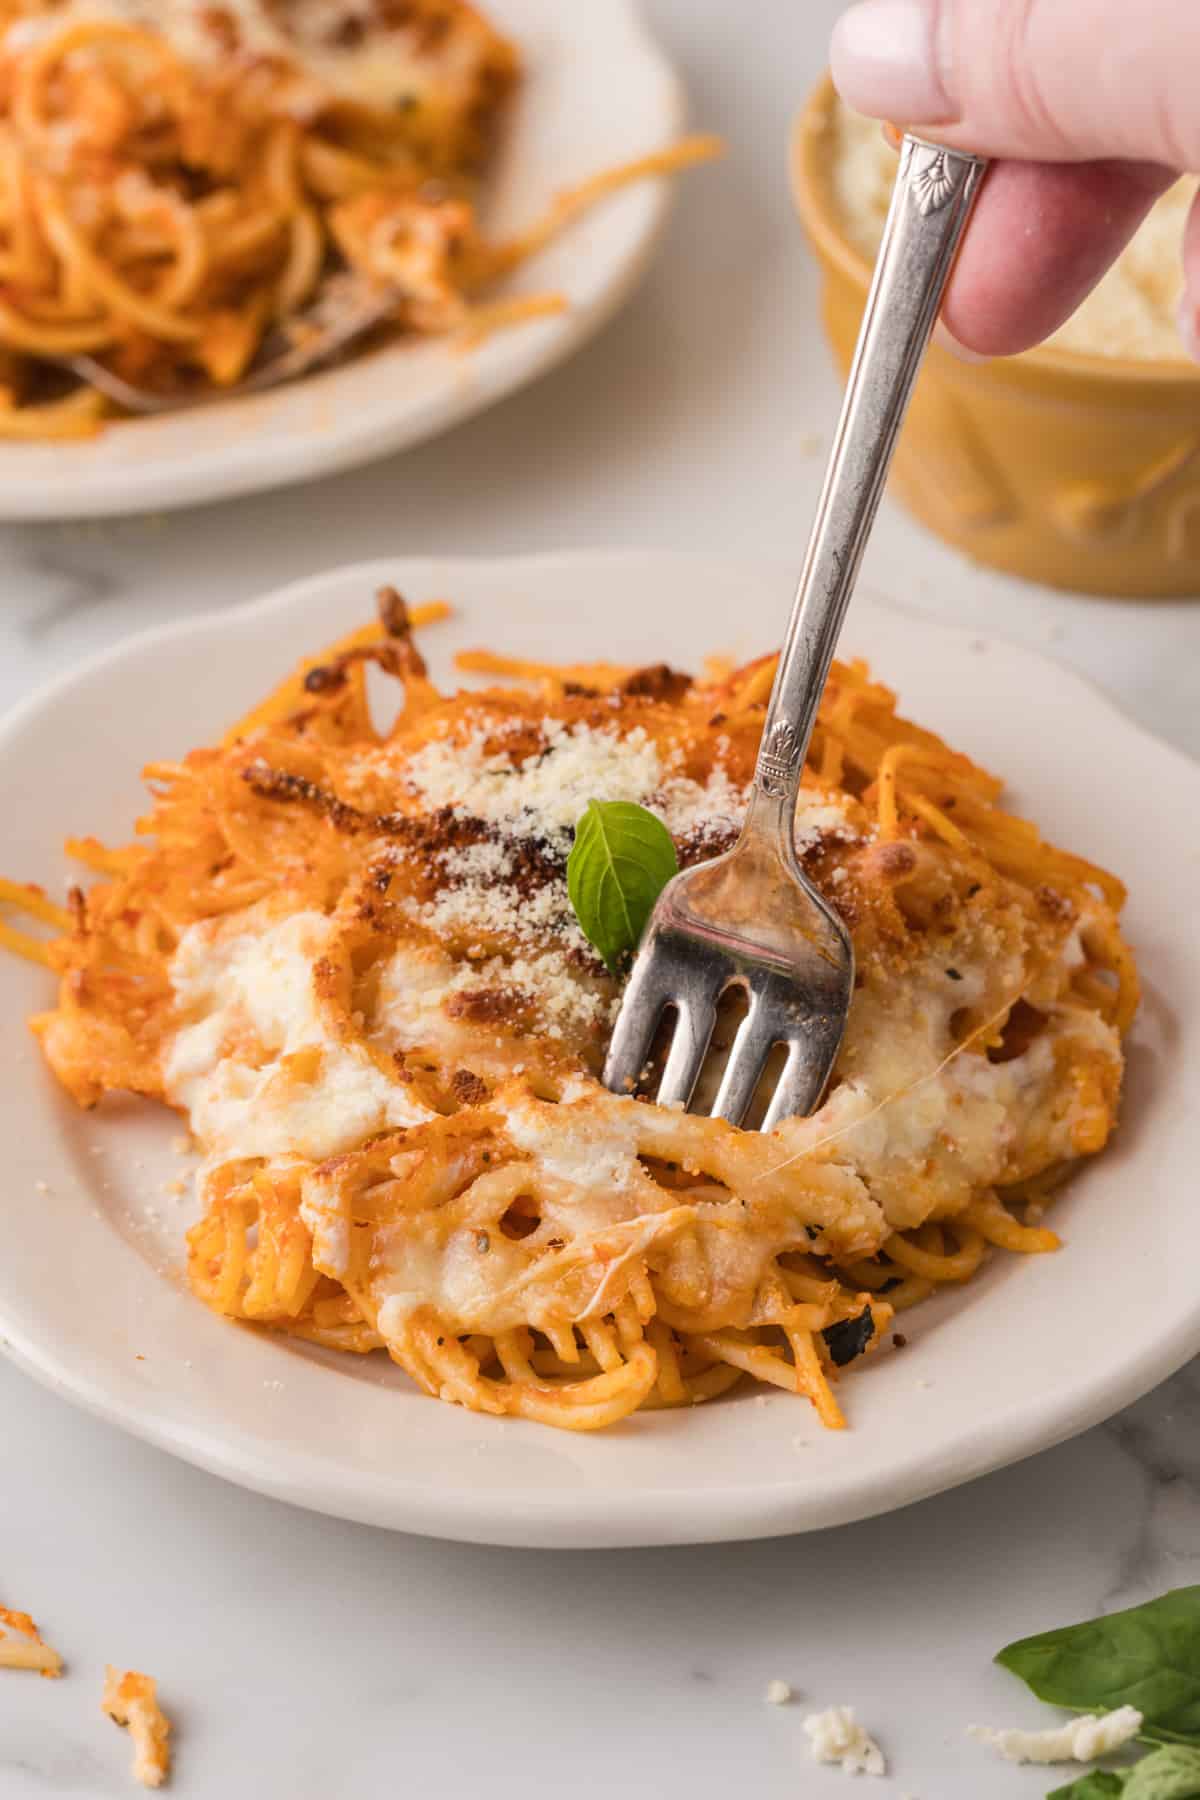 A person holding a fork to a plate of baked spaghetti with melted mozzarella and parmesan cheese.